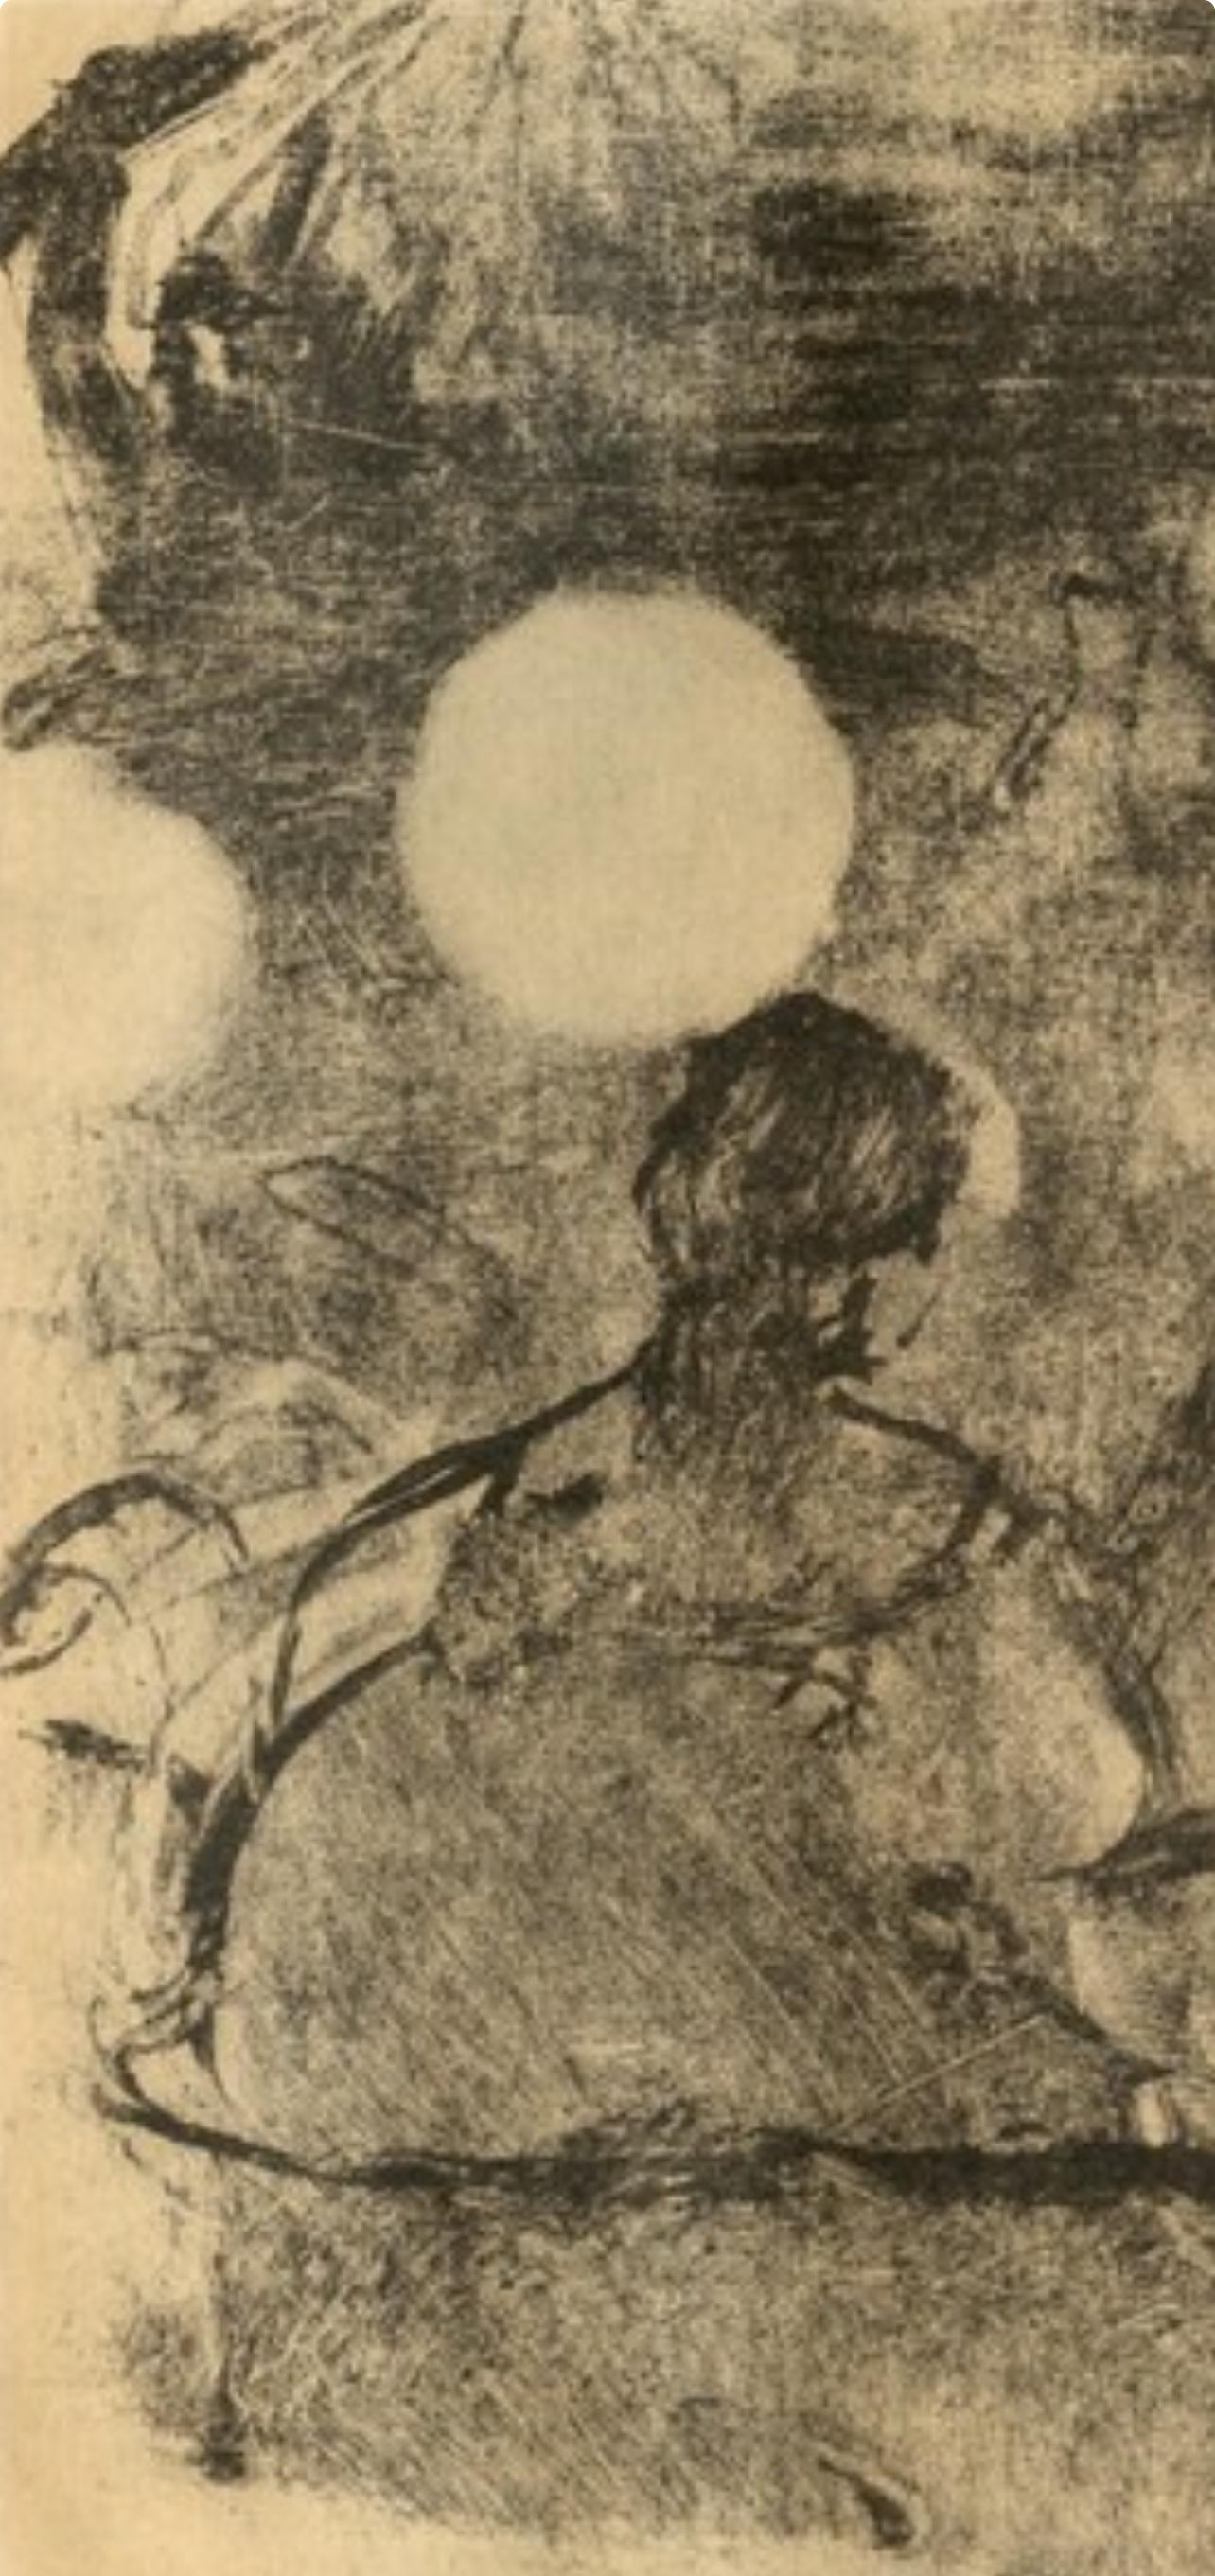 Degas, Cafe-Concert, Les Monotypes (after) - Print by Edgar Degas